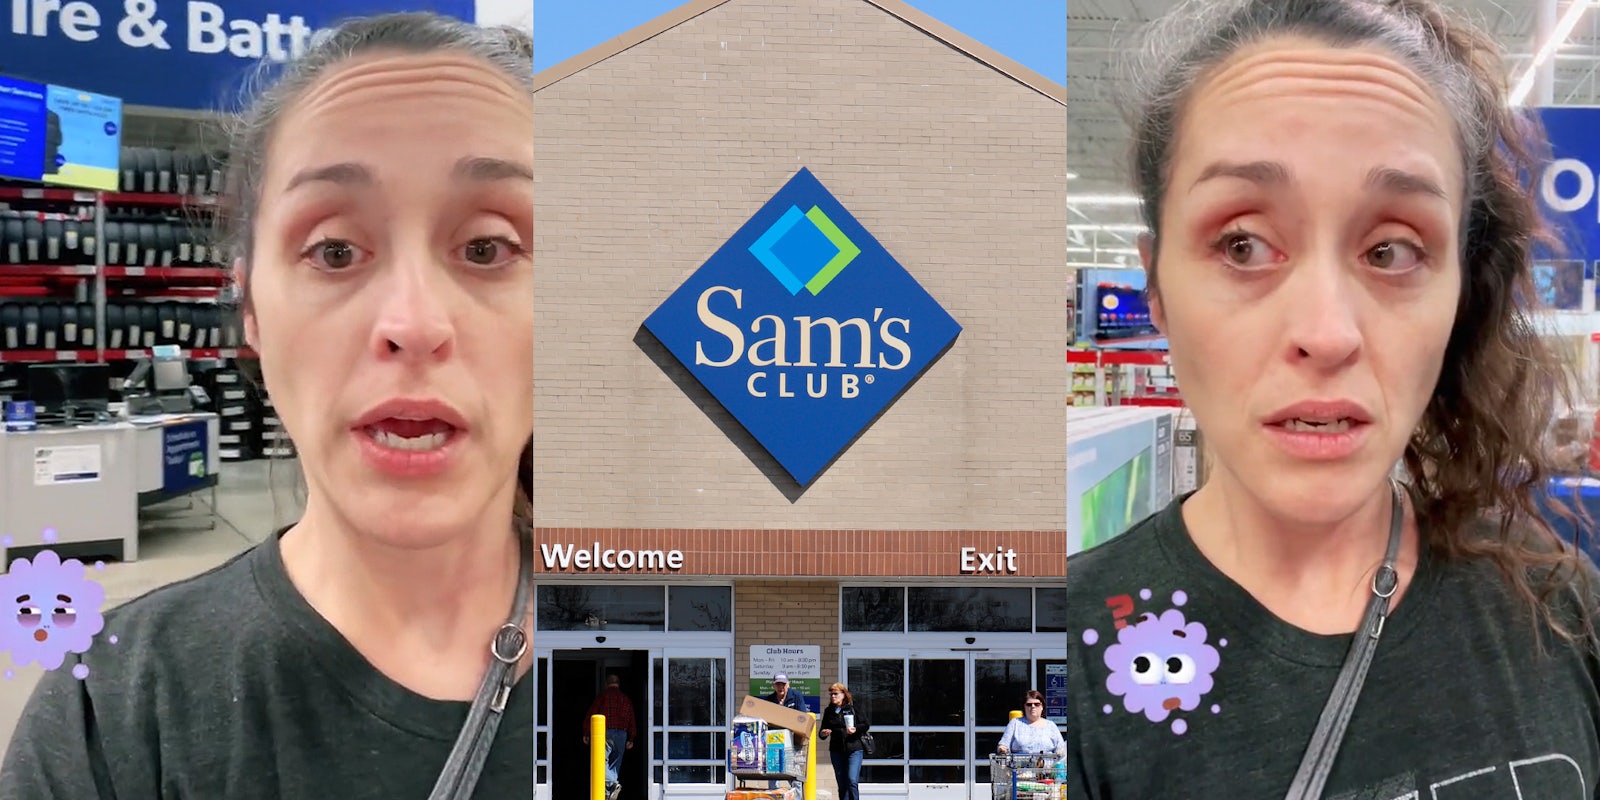 woman speaking in Sam's Club at Tire & Battery section (l) Sam's Club building with sign (c) woman speaking in Sam's Club (r)